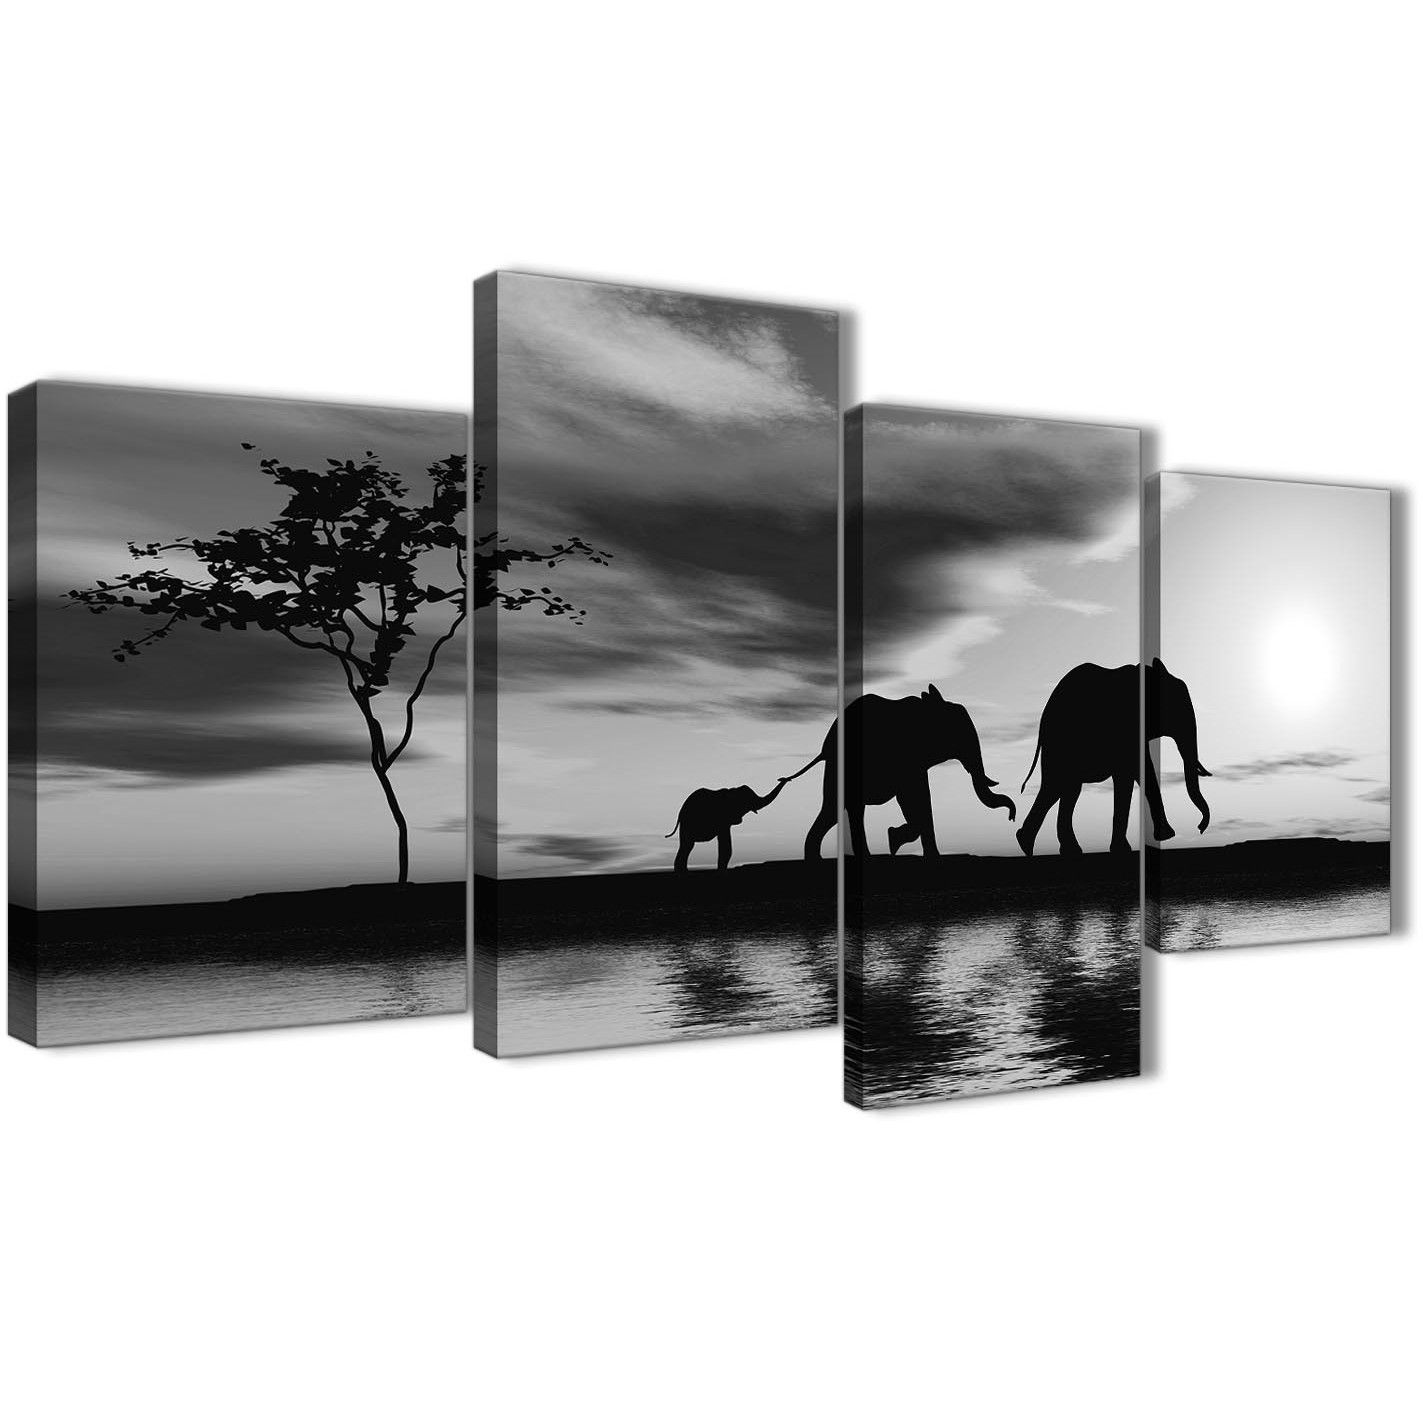 Large Black White African Sunset Elephants Canvas Wall Art Print Regarding Black And White Large Canvas Wall Art (View 20 of 20)